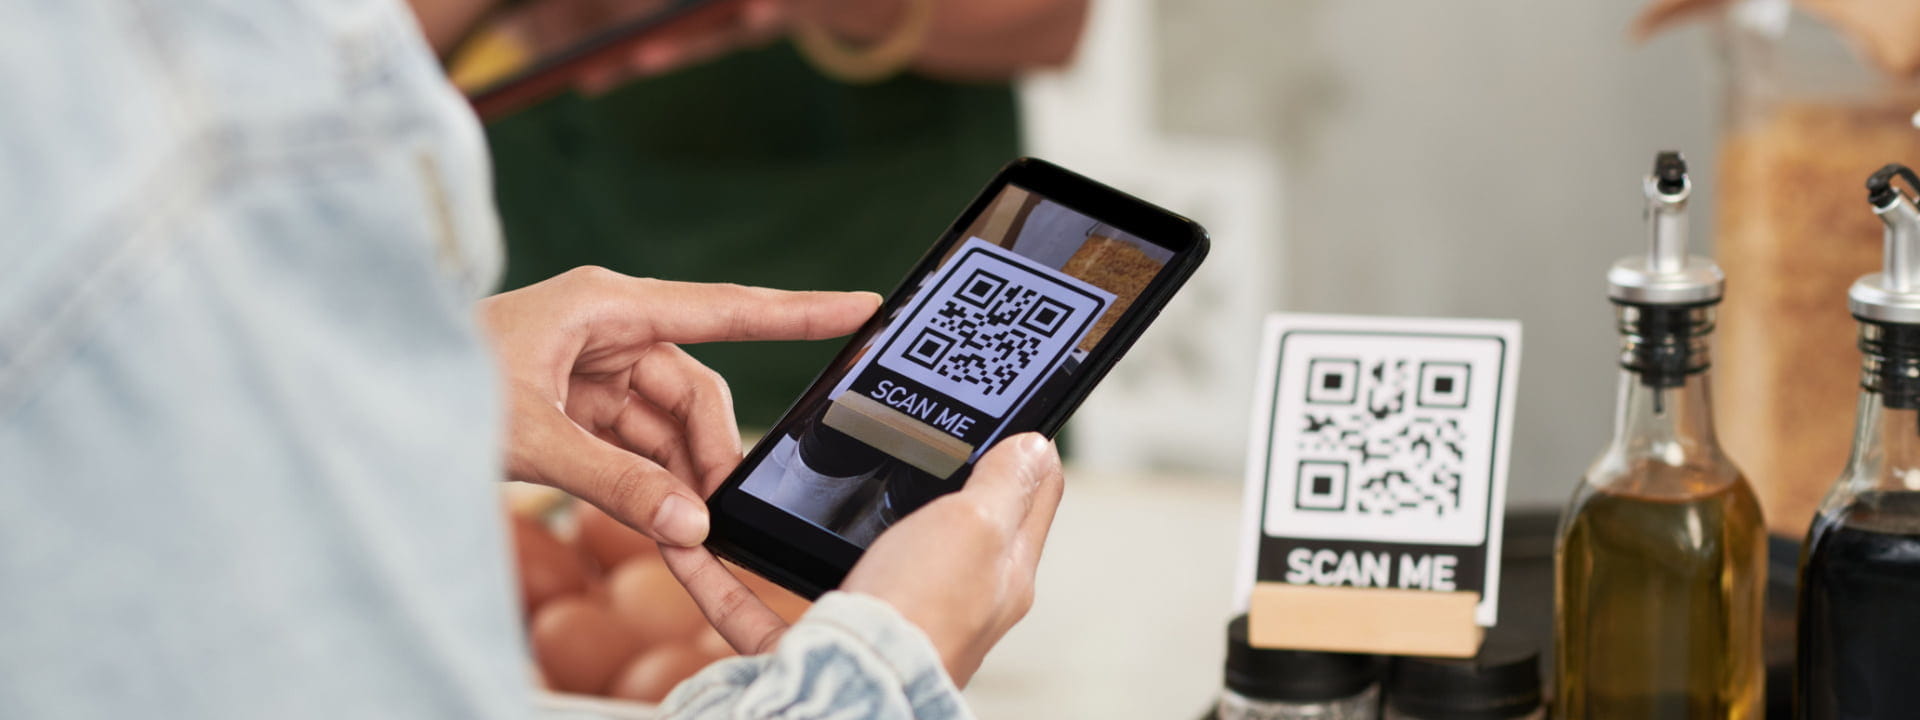 A person scanning a QR code with a smartphone in a restaurant